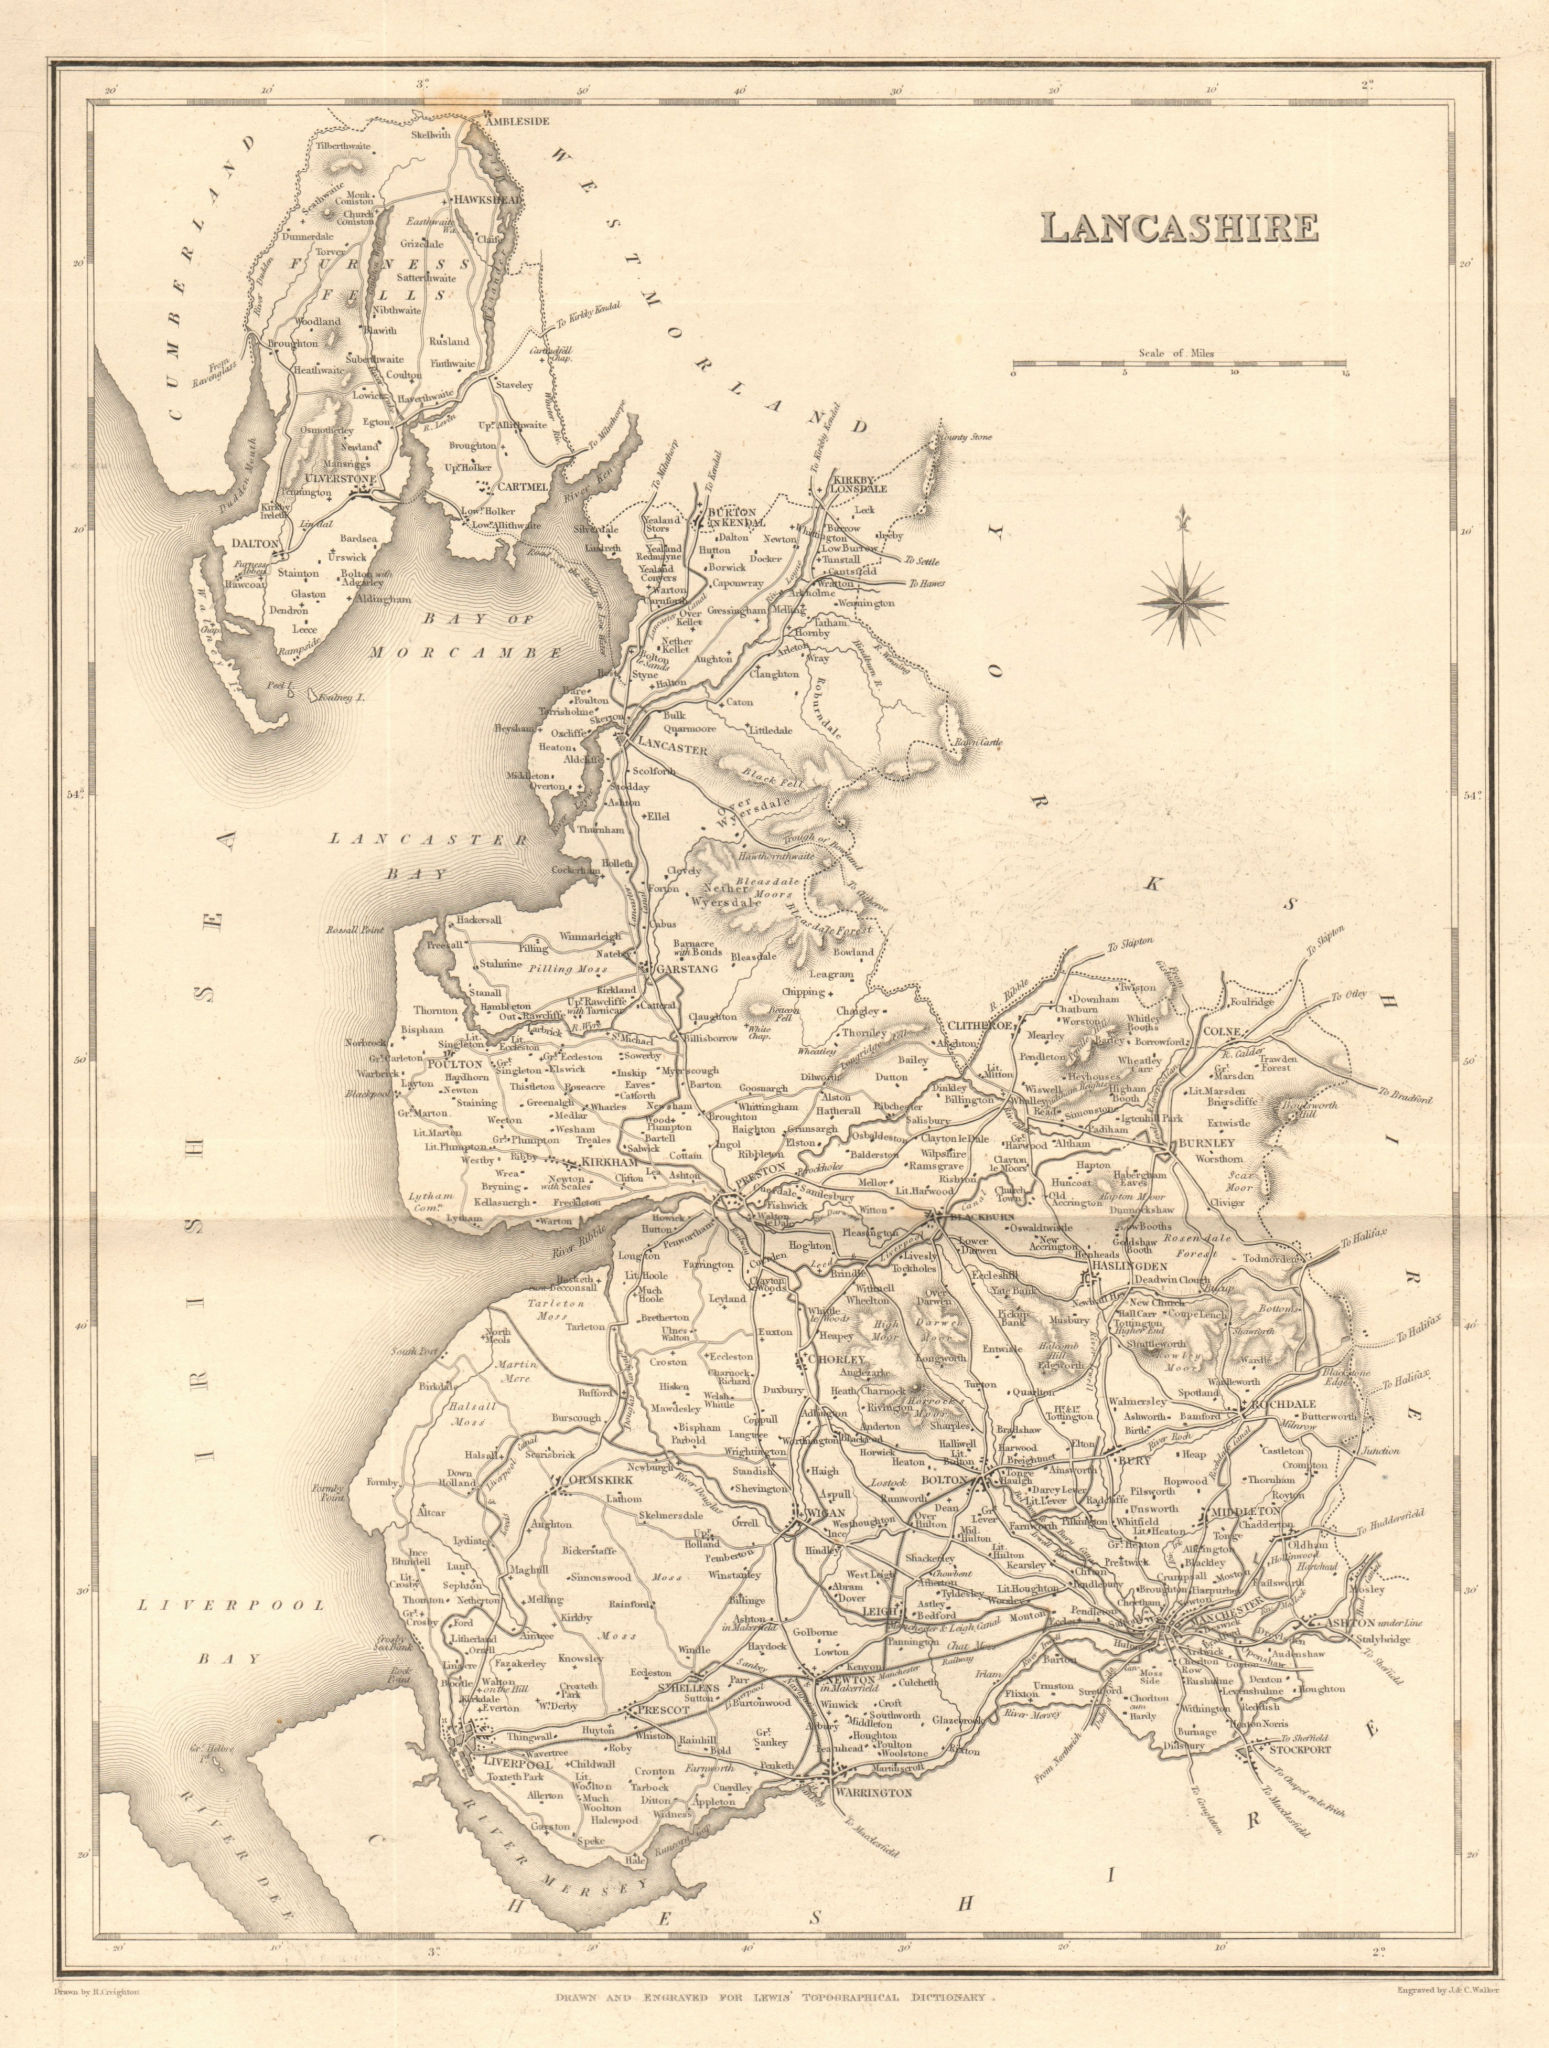 Associate Product Antique county map of LANCASHIRE by Walker & Creighton for Lewis c1840 old